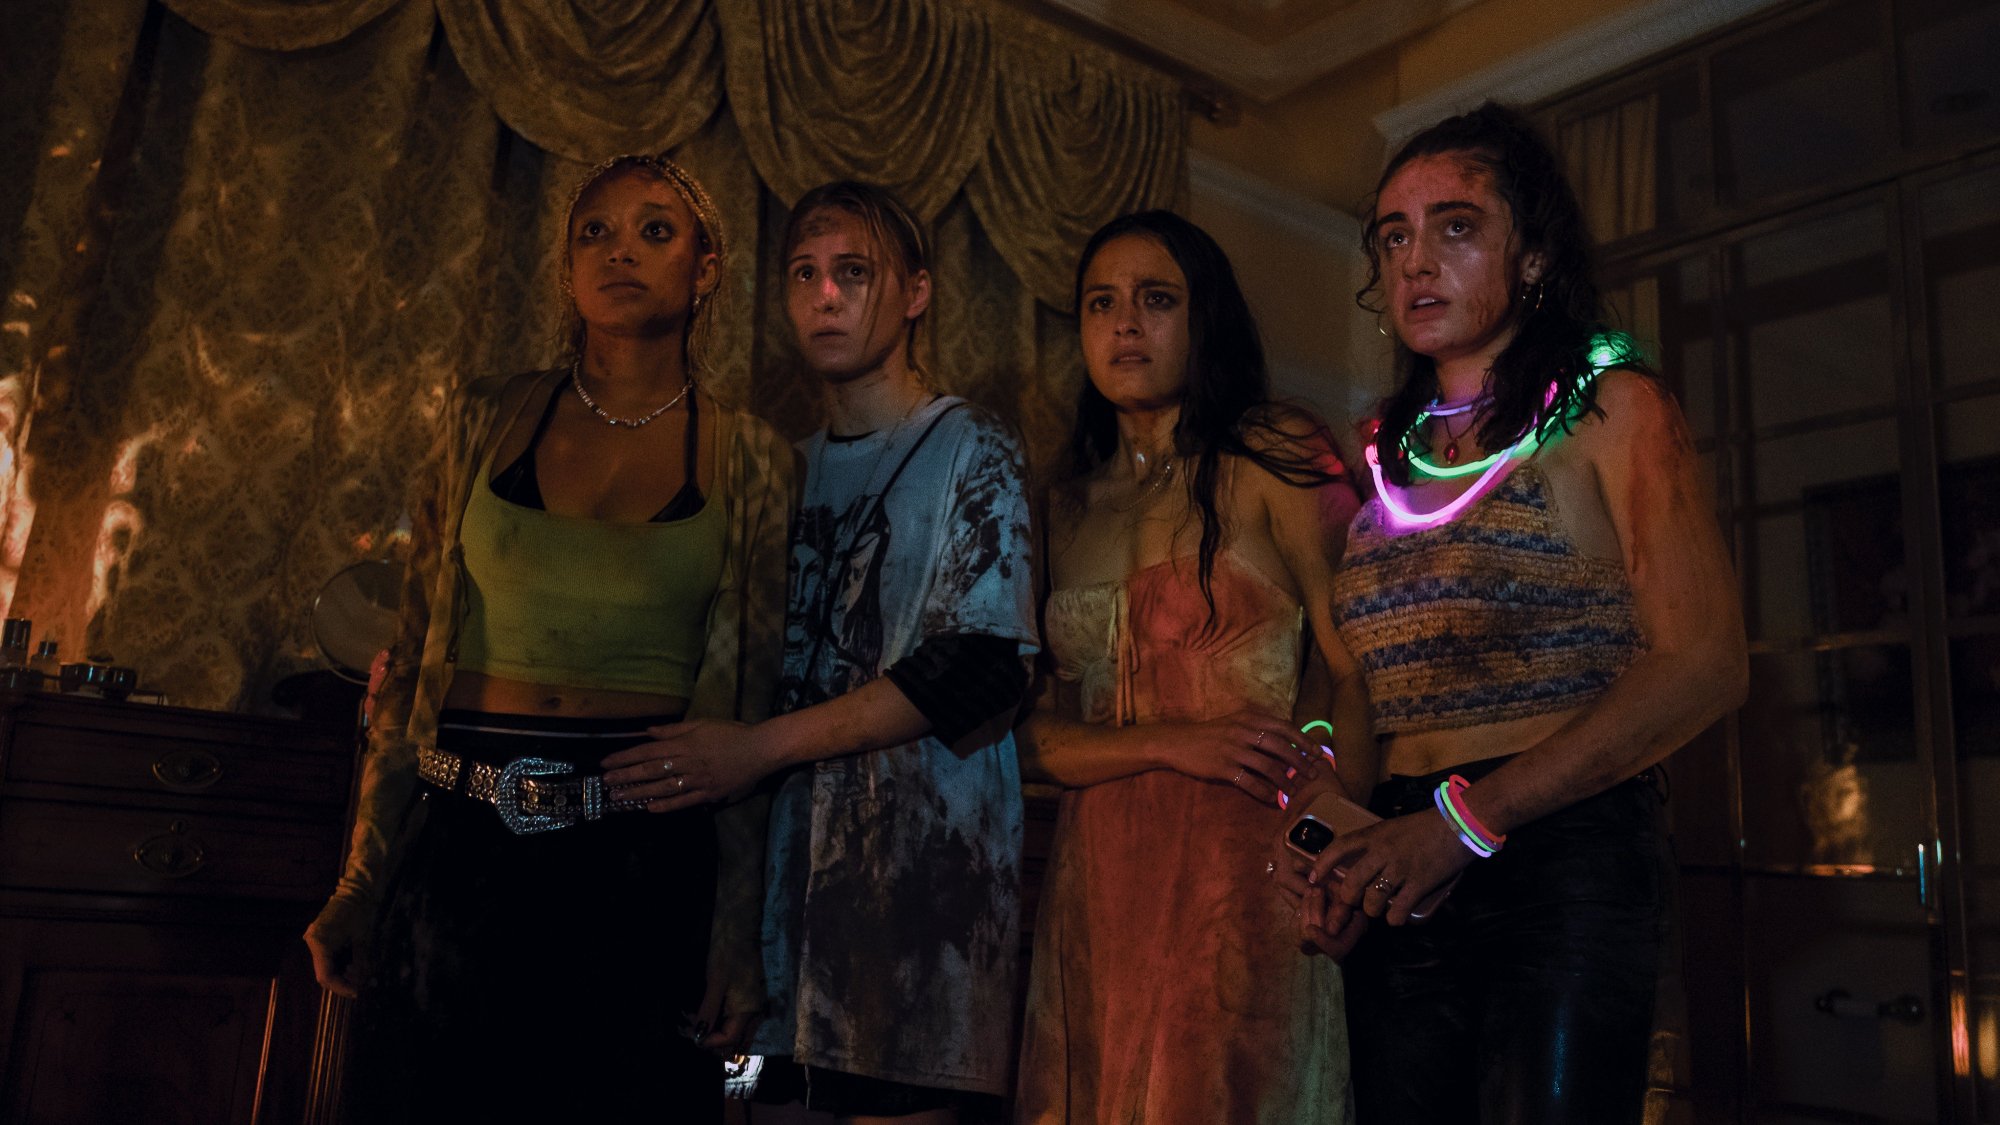 'Bodies Bodies Bodies' Amandla Stenberg as Sophie, Maria Baklava as Bee, Chase Sui Wonders as Emma, and Rachel Sennott as Alice looking terrified with distressed clothes and gold curtains behind them